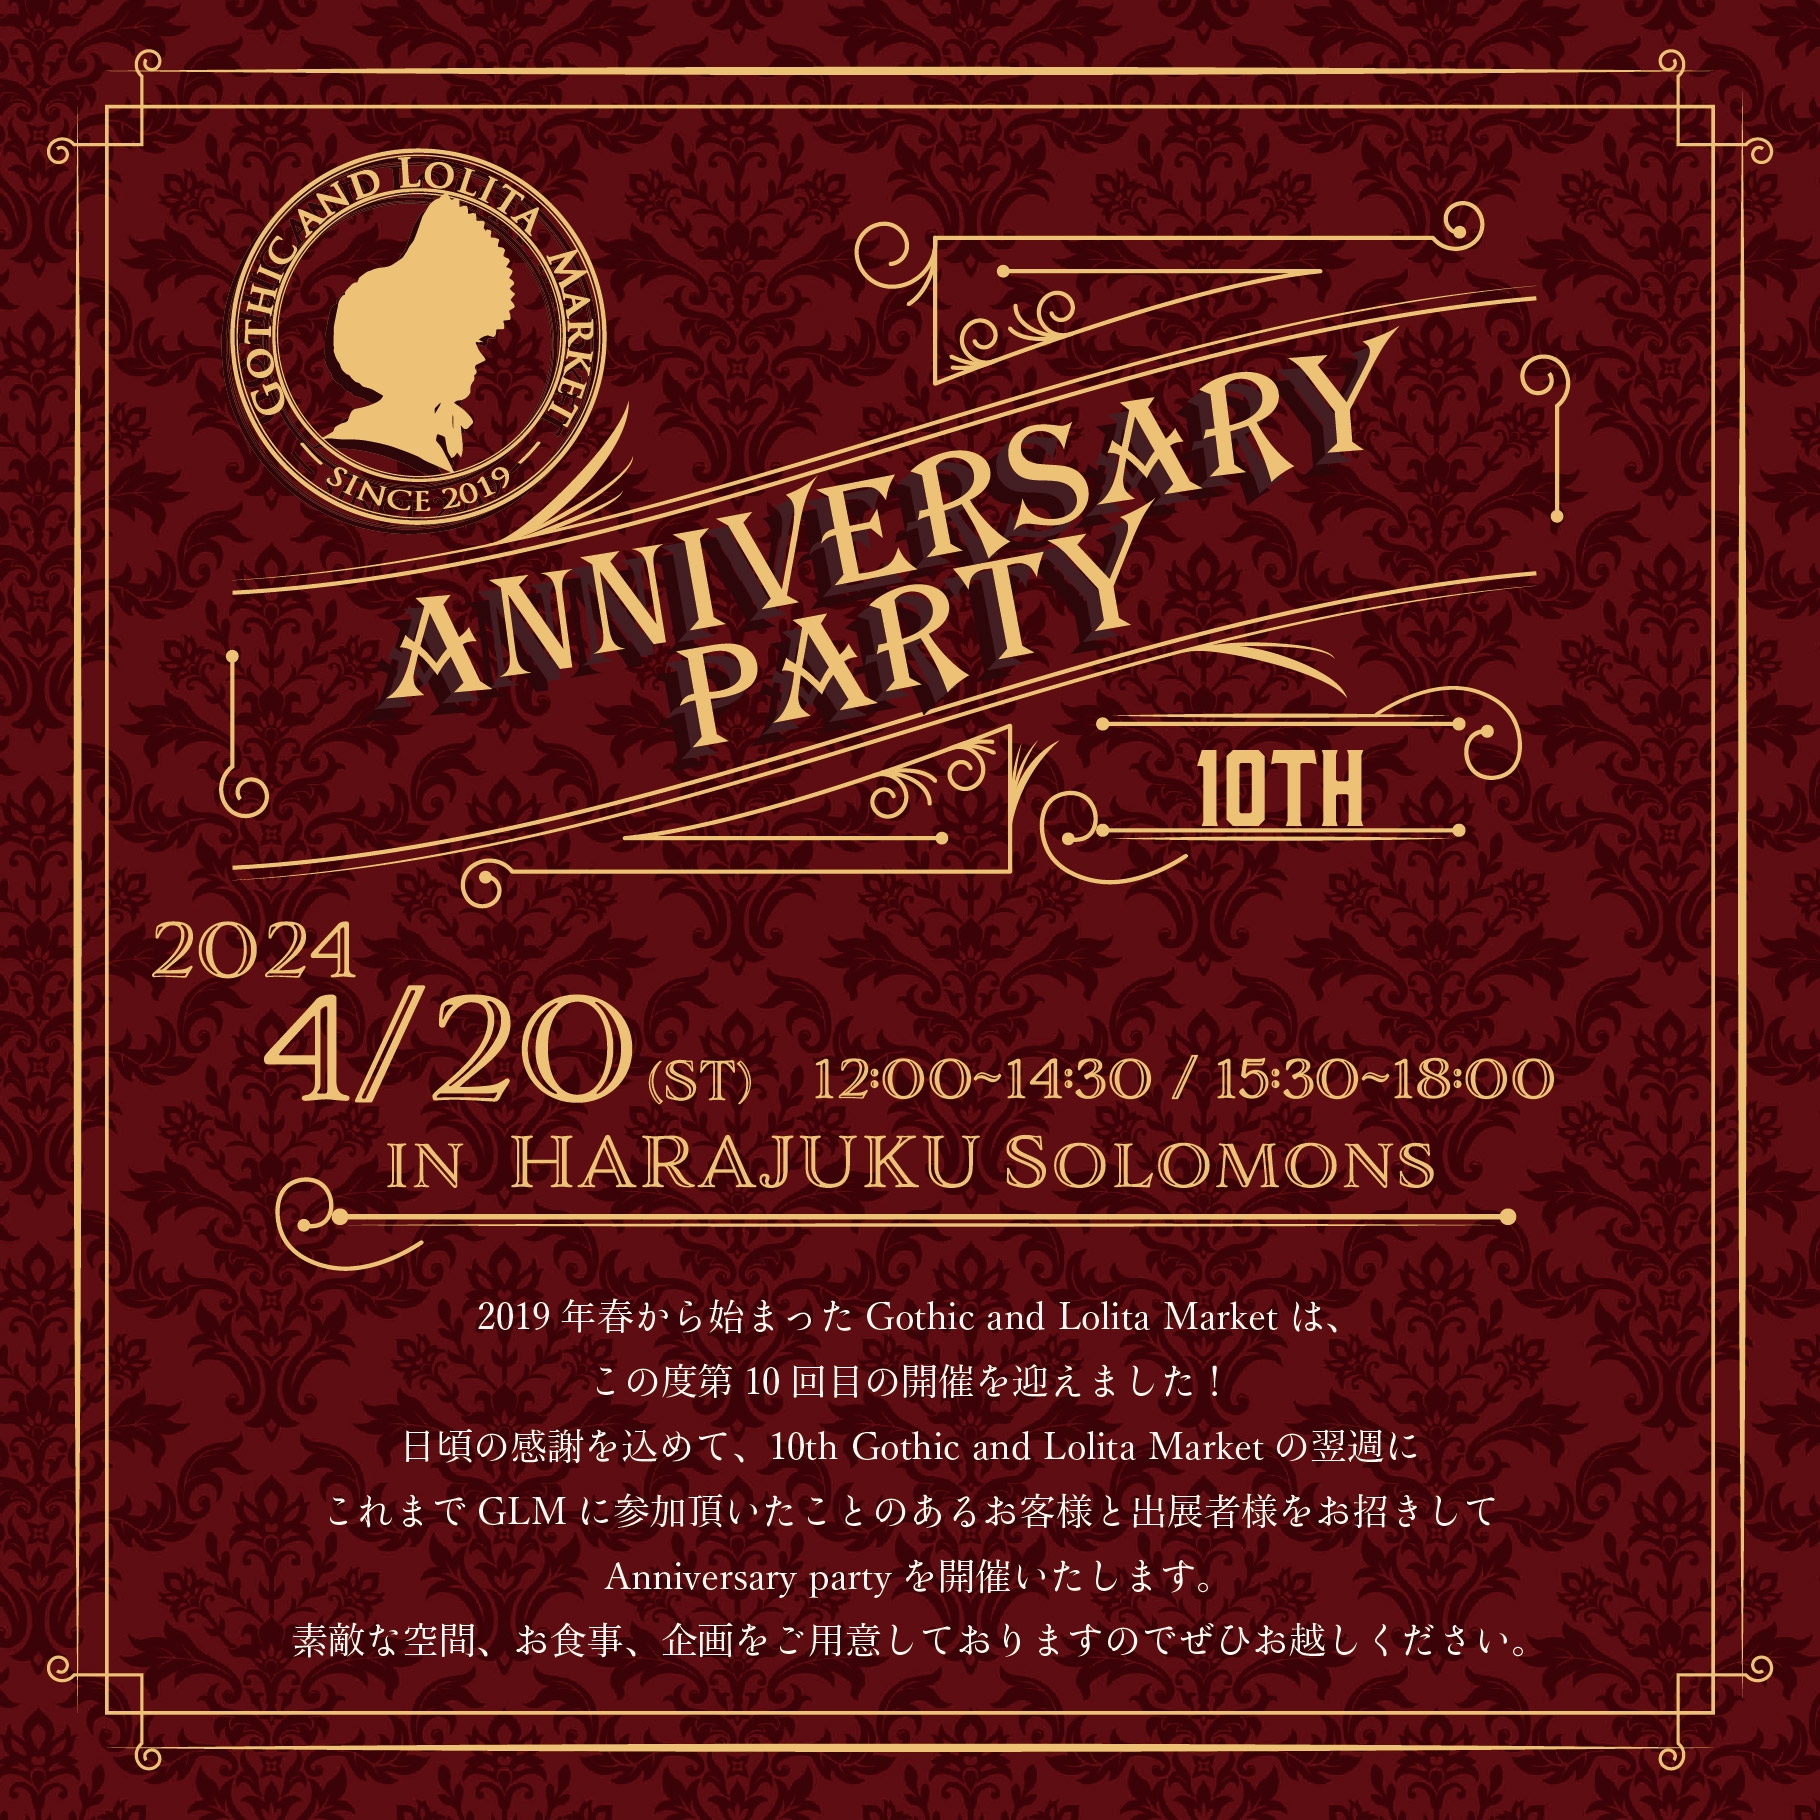 10th GLM Anniversary party | Gothic and Lolita Market 公式サイト